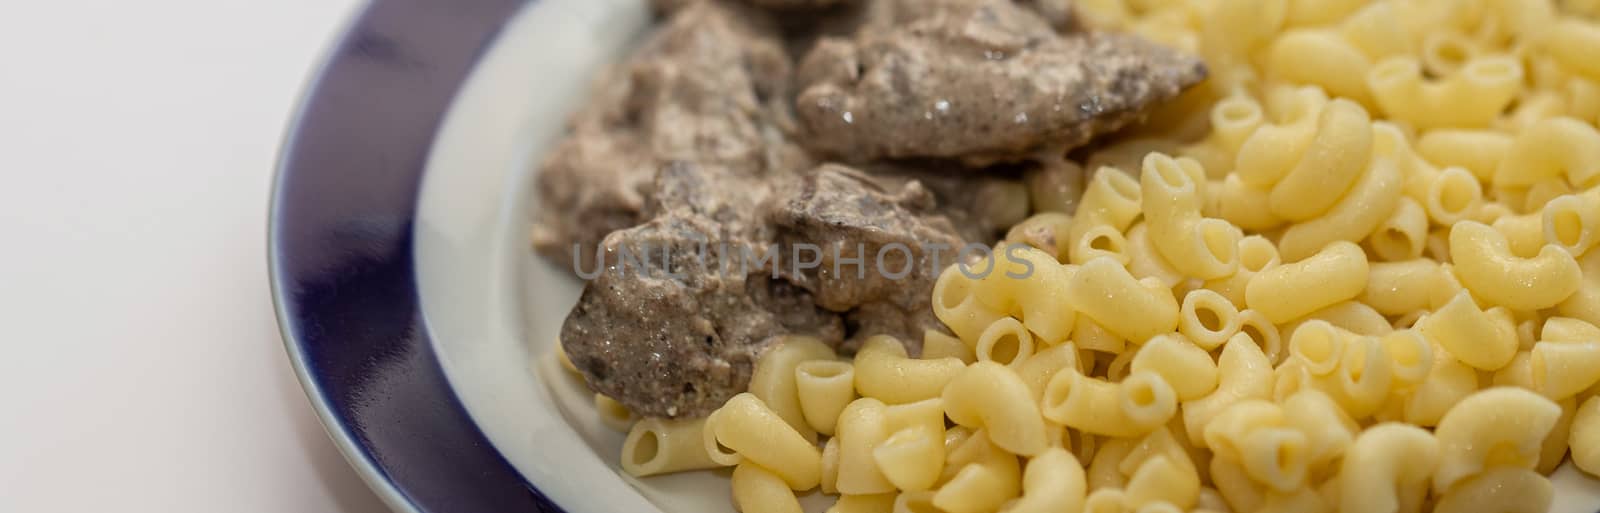 Chicken liver and pasta dish in a bowl by bonilook